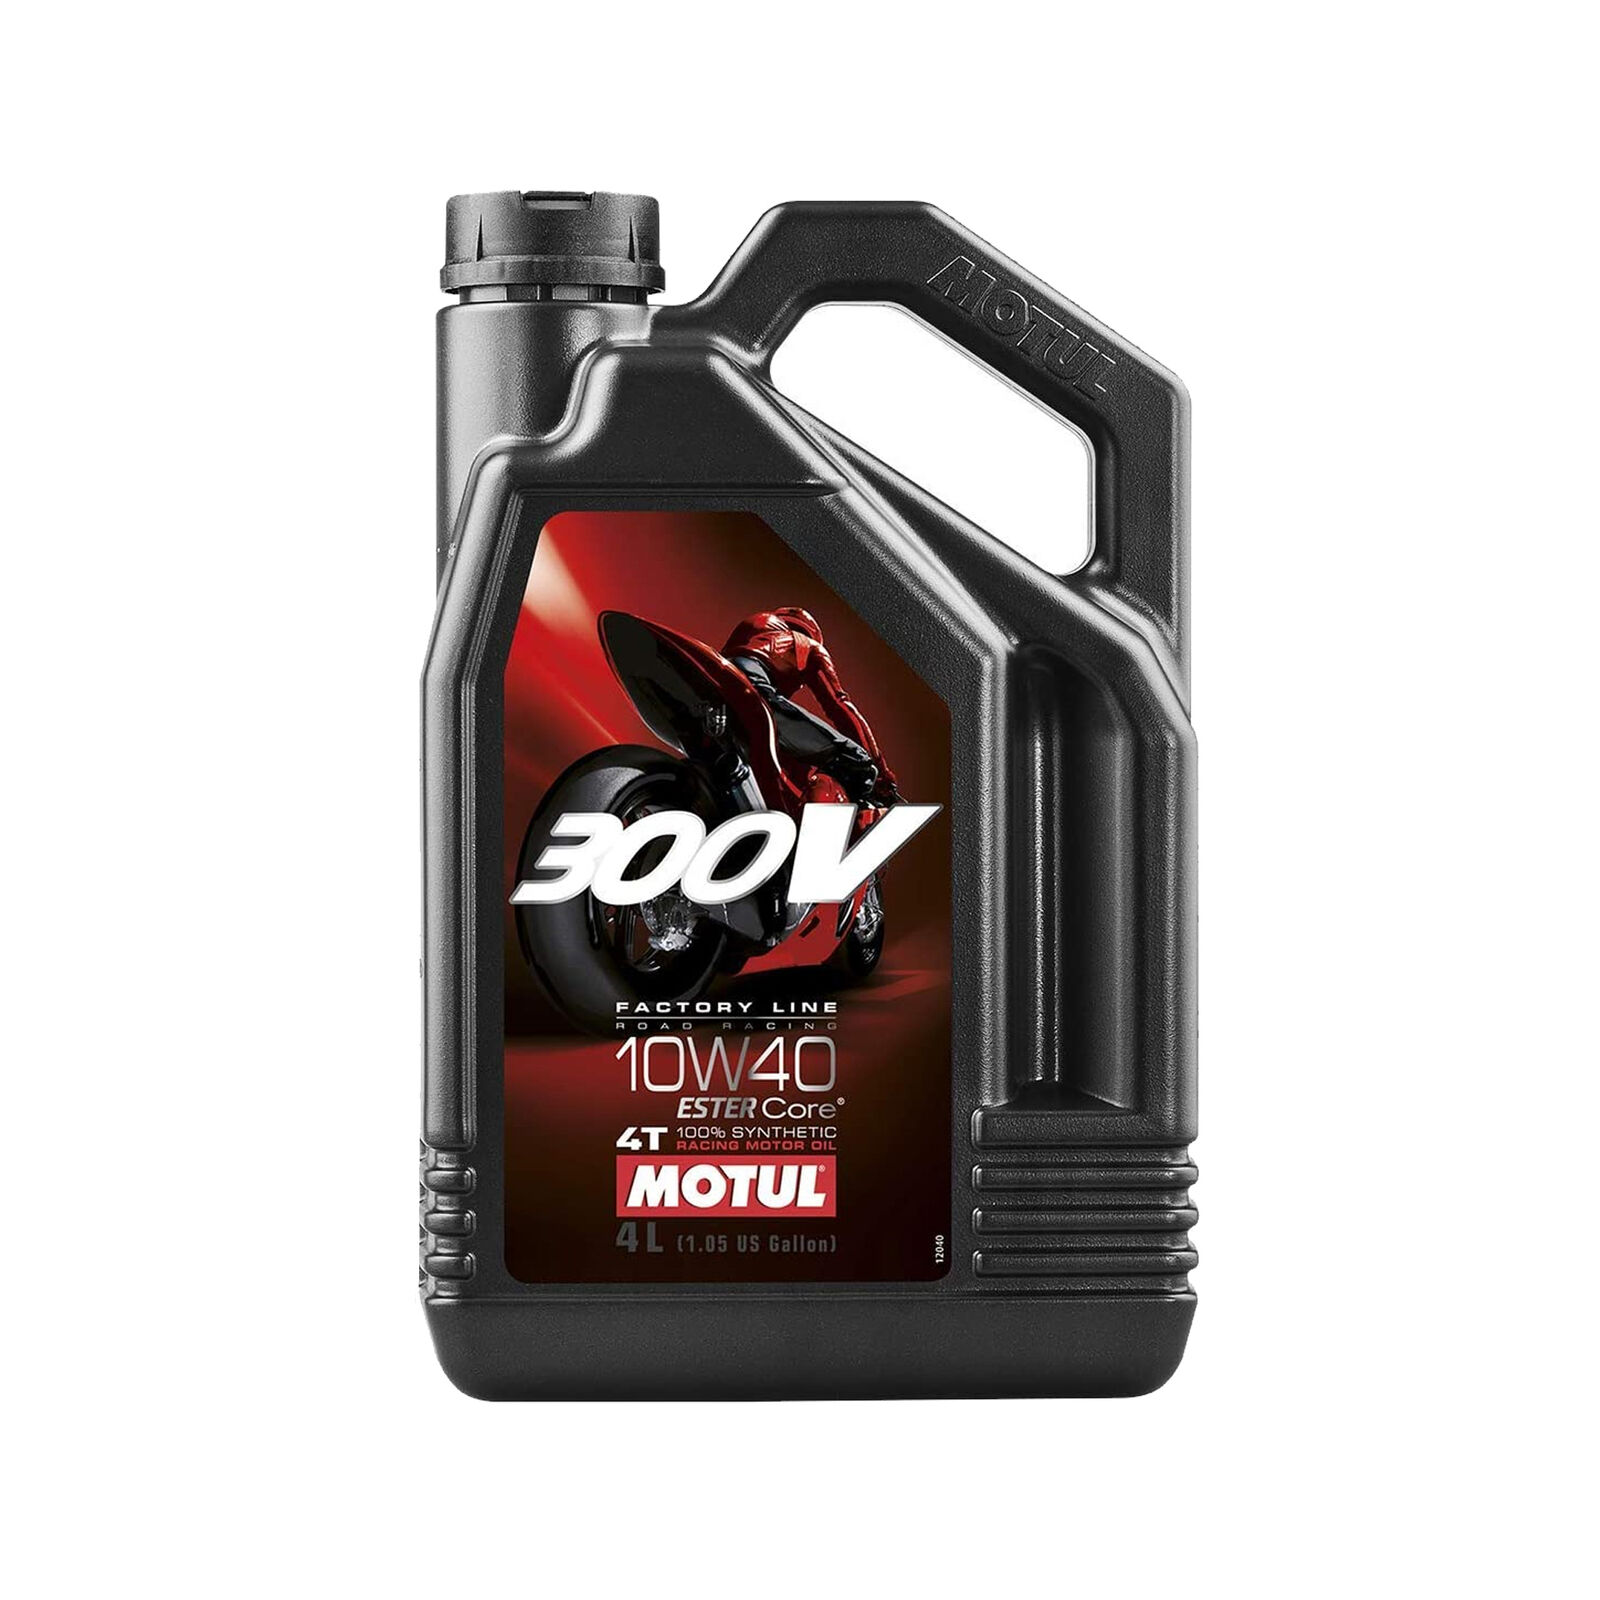 Motul 300V Synthetic Factory Line Road Racing Motorcycle Oil 10W-40 4L 104121